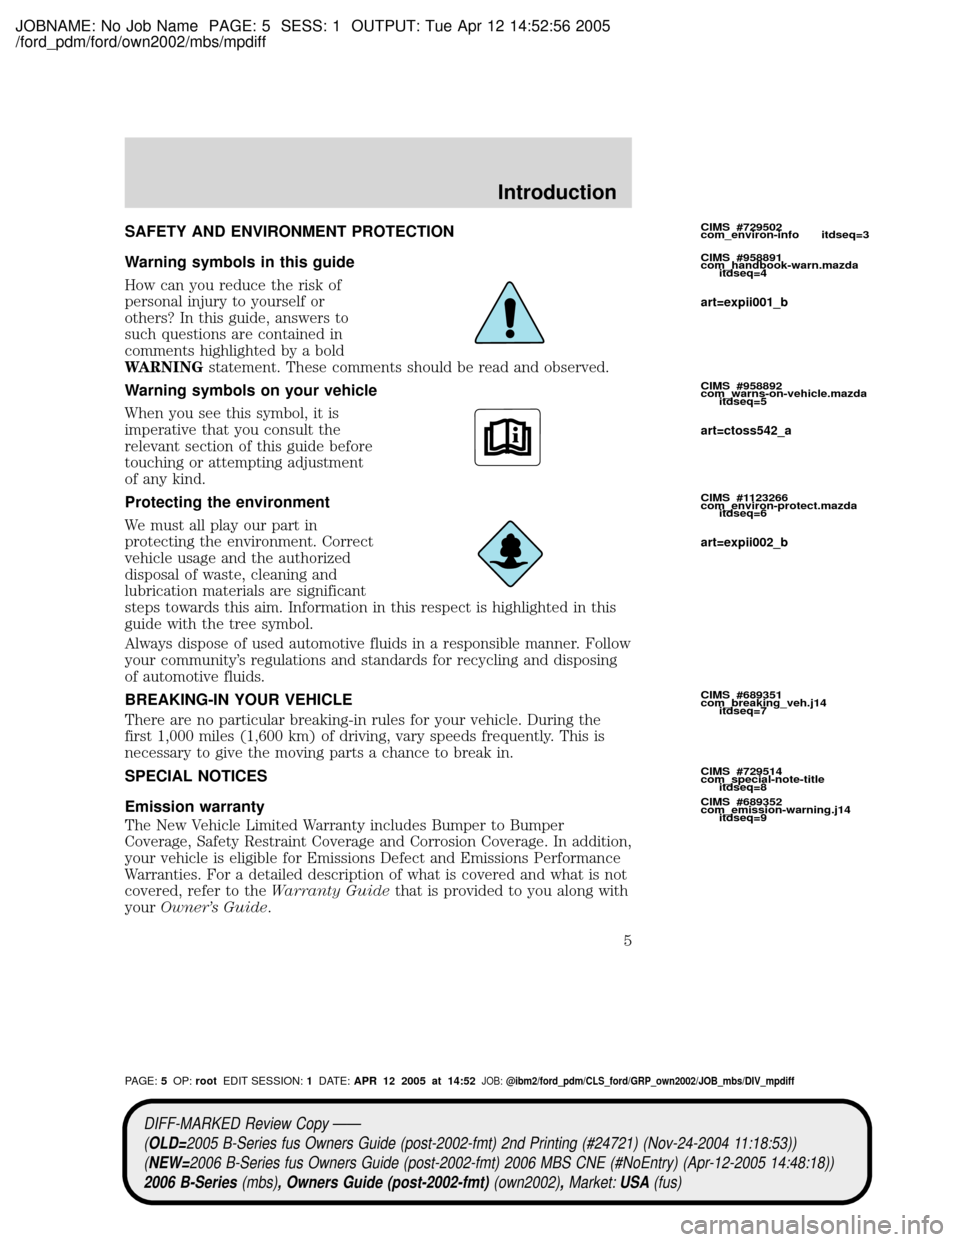 MAZDA MODEL B2300 TRUCK 2006  Owners Manual (in English) JOBNAME: No Job Name PAGE: 5 SESS: 1 OUTPUT: Tue Apr 12 14:52:56 2005
/ford_pdm/ford/own2002/mbs/mpdiff
SAFETY AND ENVIRONMENT PROTECTION
Warning symbols in this guide
How can you reduce the risk of
p